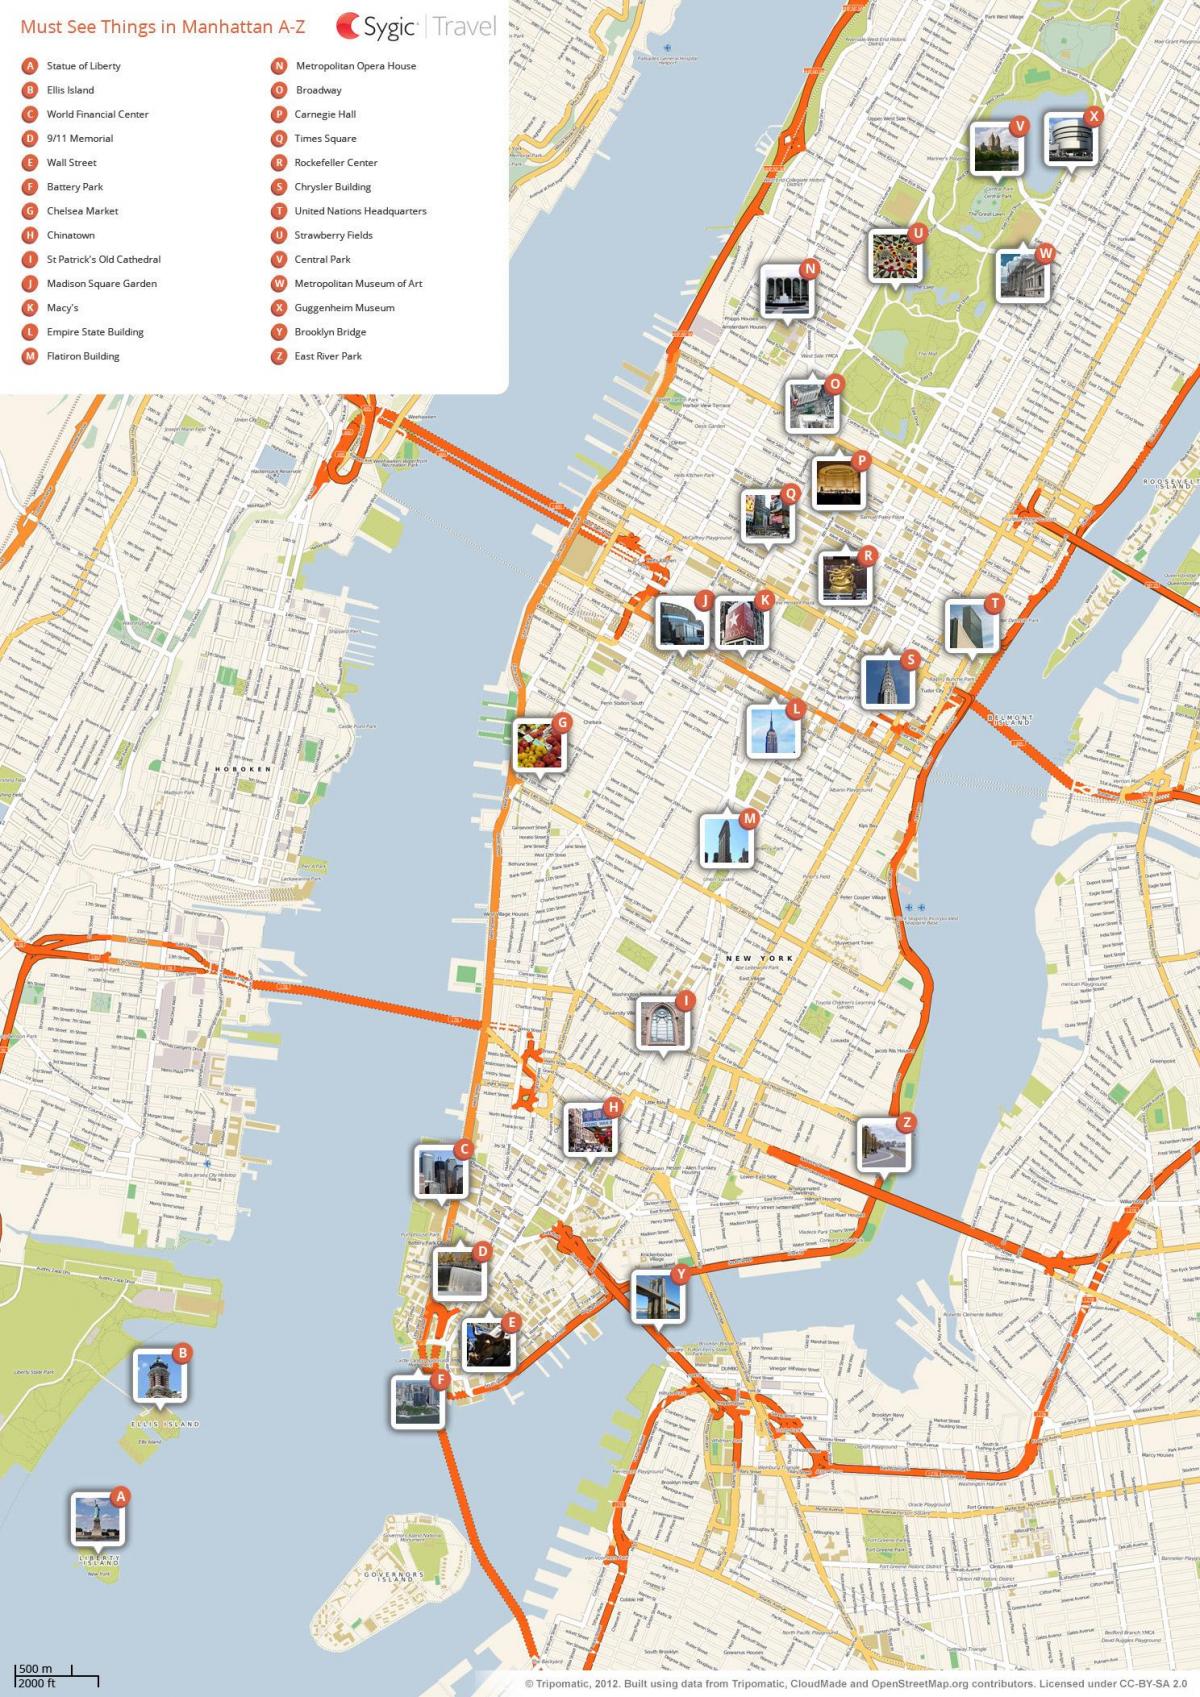 New York City tourist attractions map